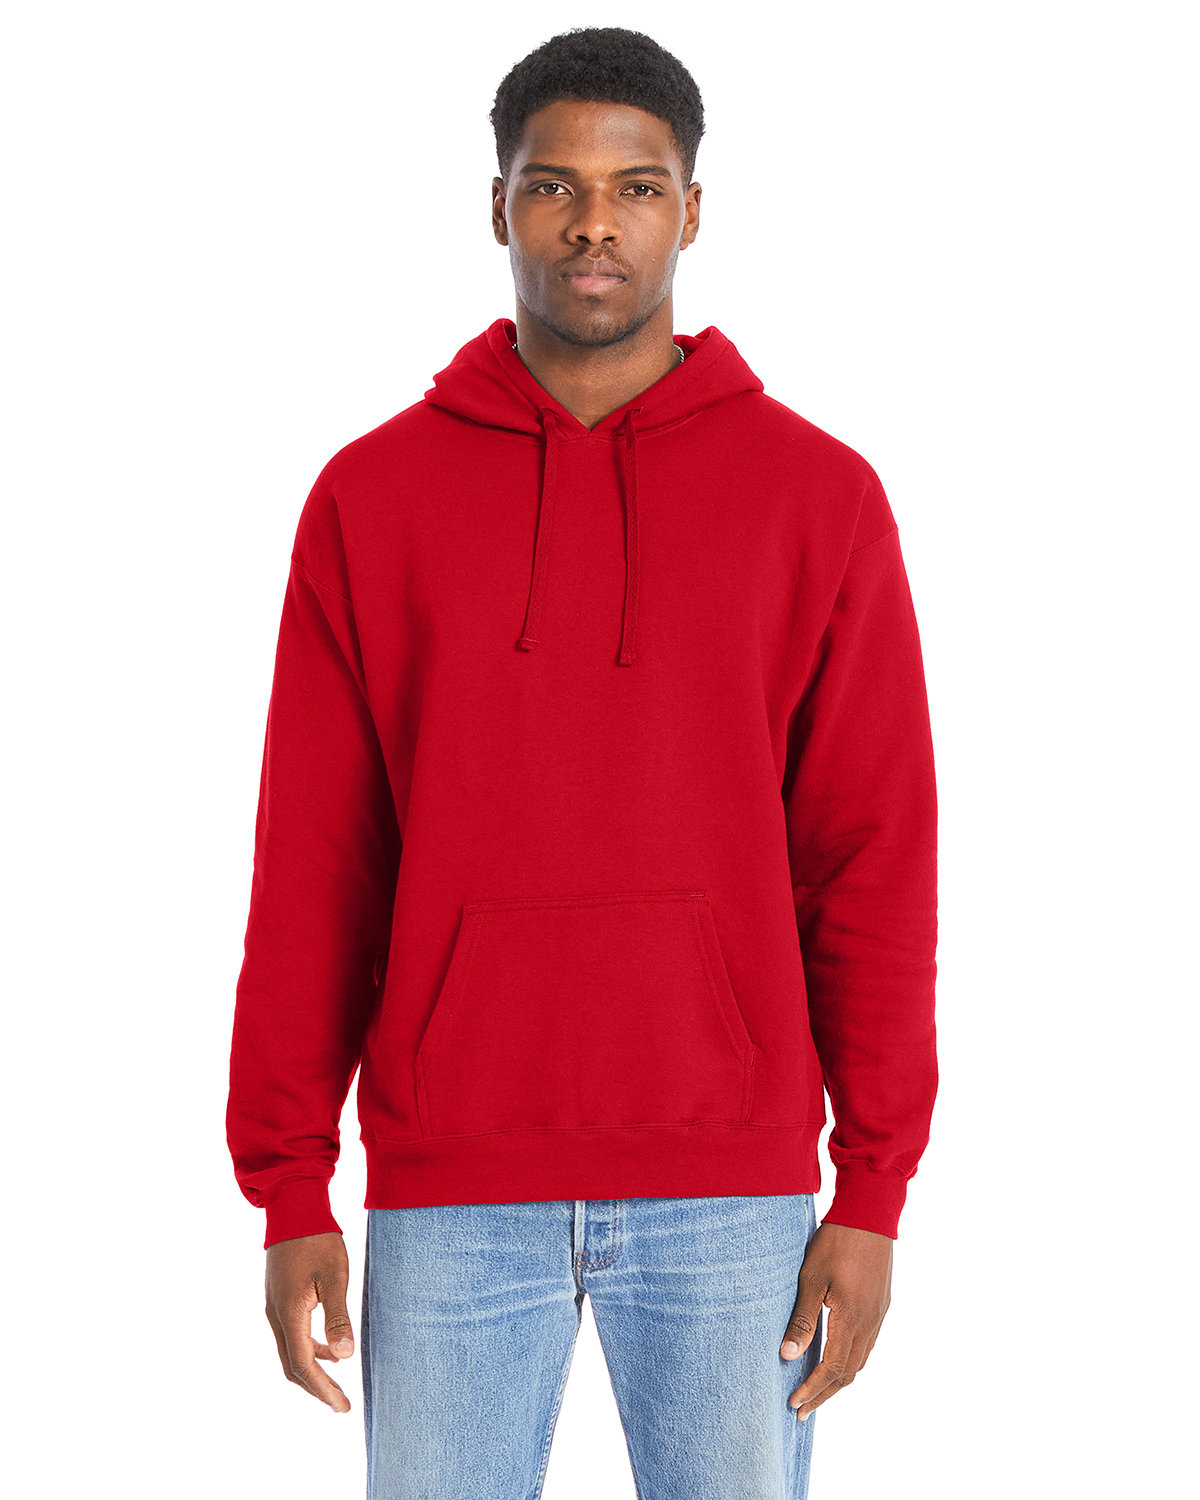 Hanes Perfect Sweats Pullover Hooded Sweatshirt ATHLETIC RED 